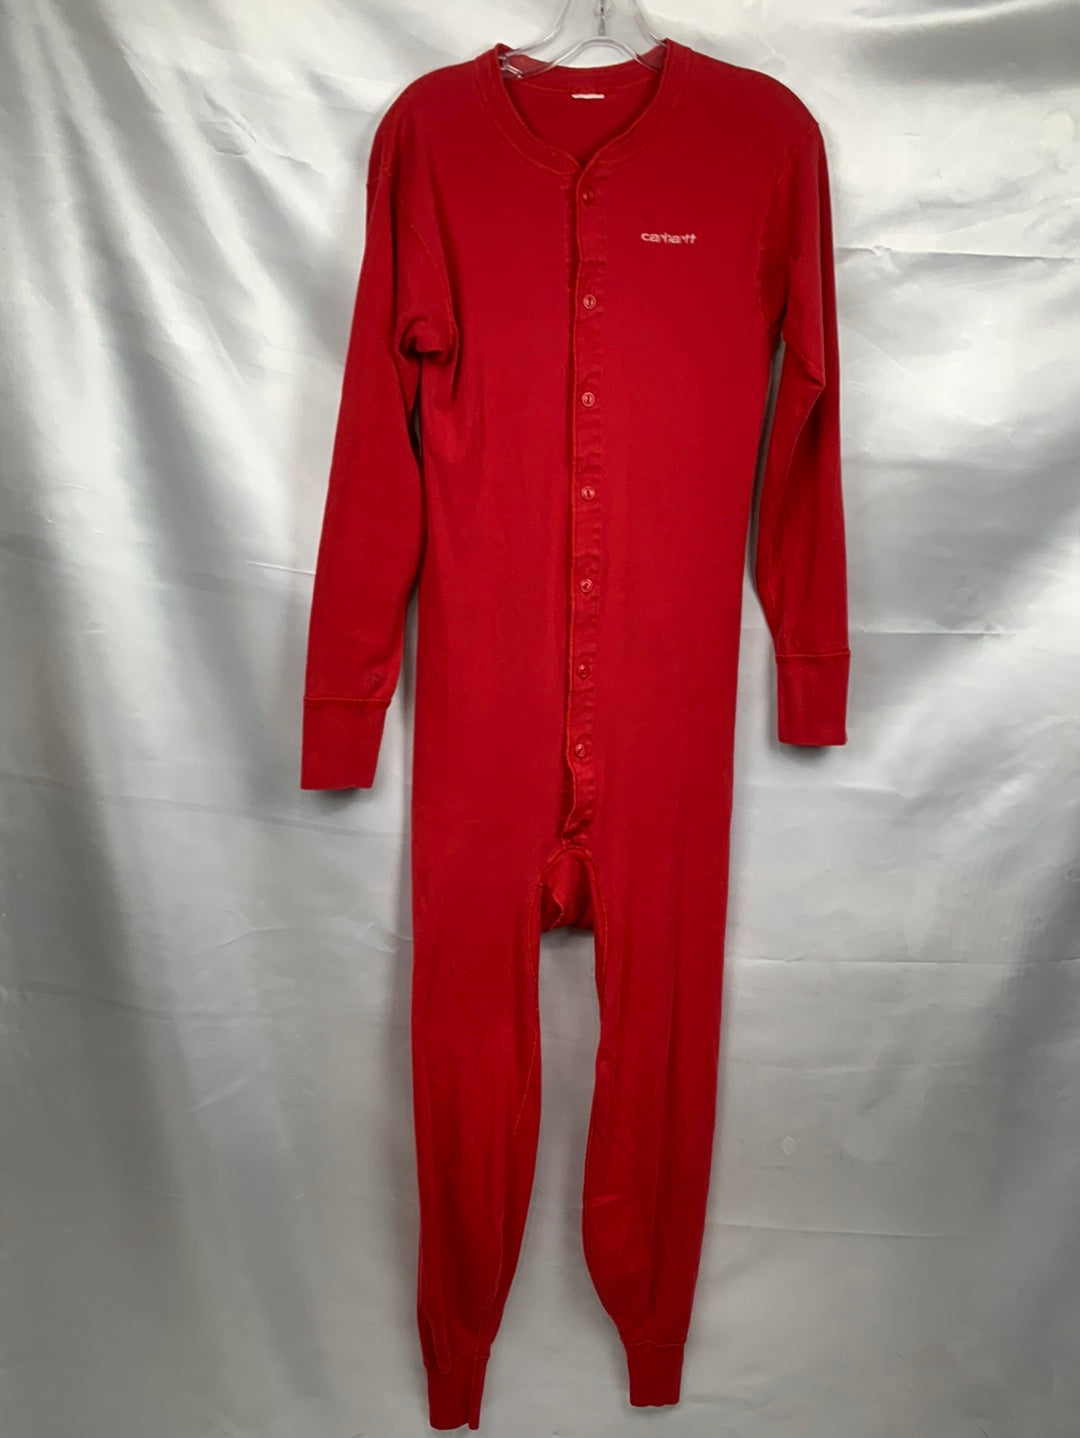 Union Suit Long Johns Thermal Underwear Mens 38 -40 Red